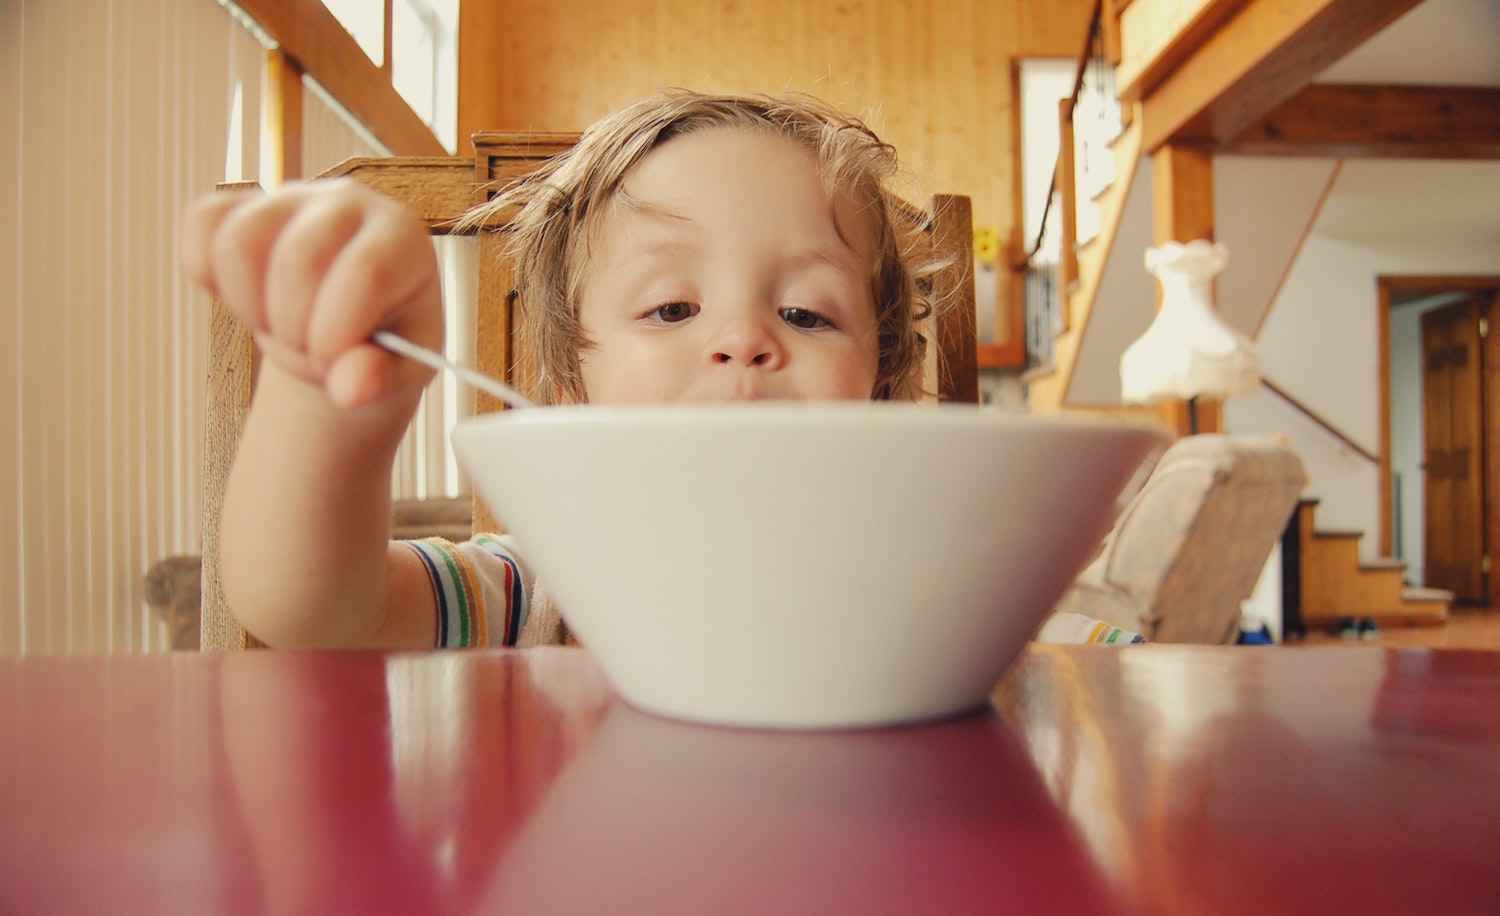 A picky eater child with a bowl of cereal who may be a highly sensitive person